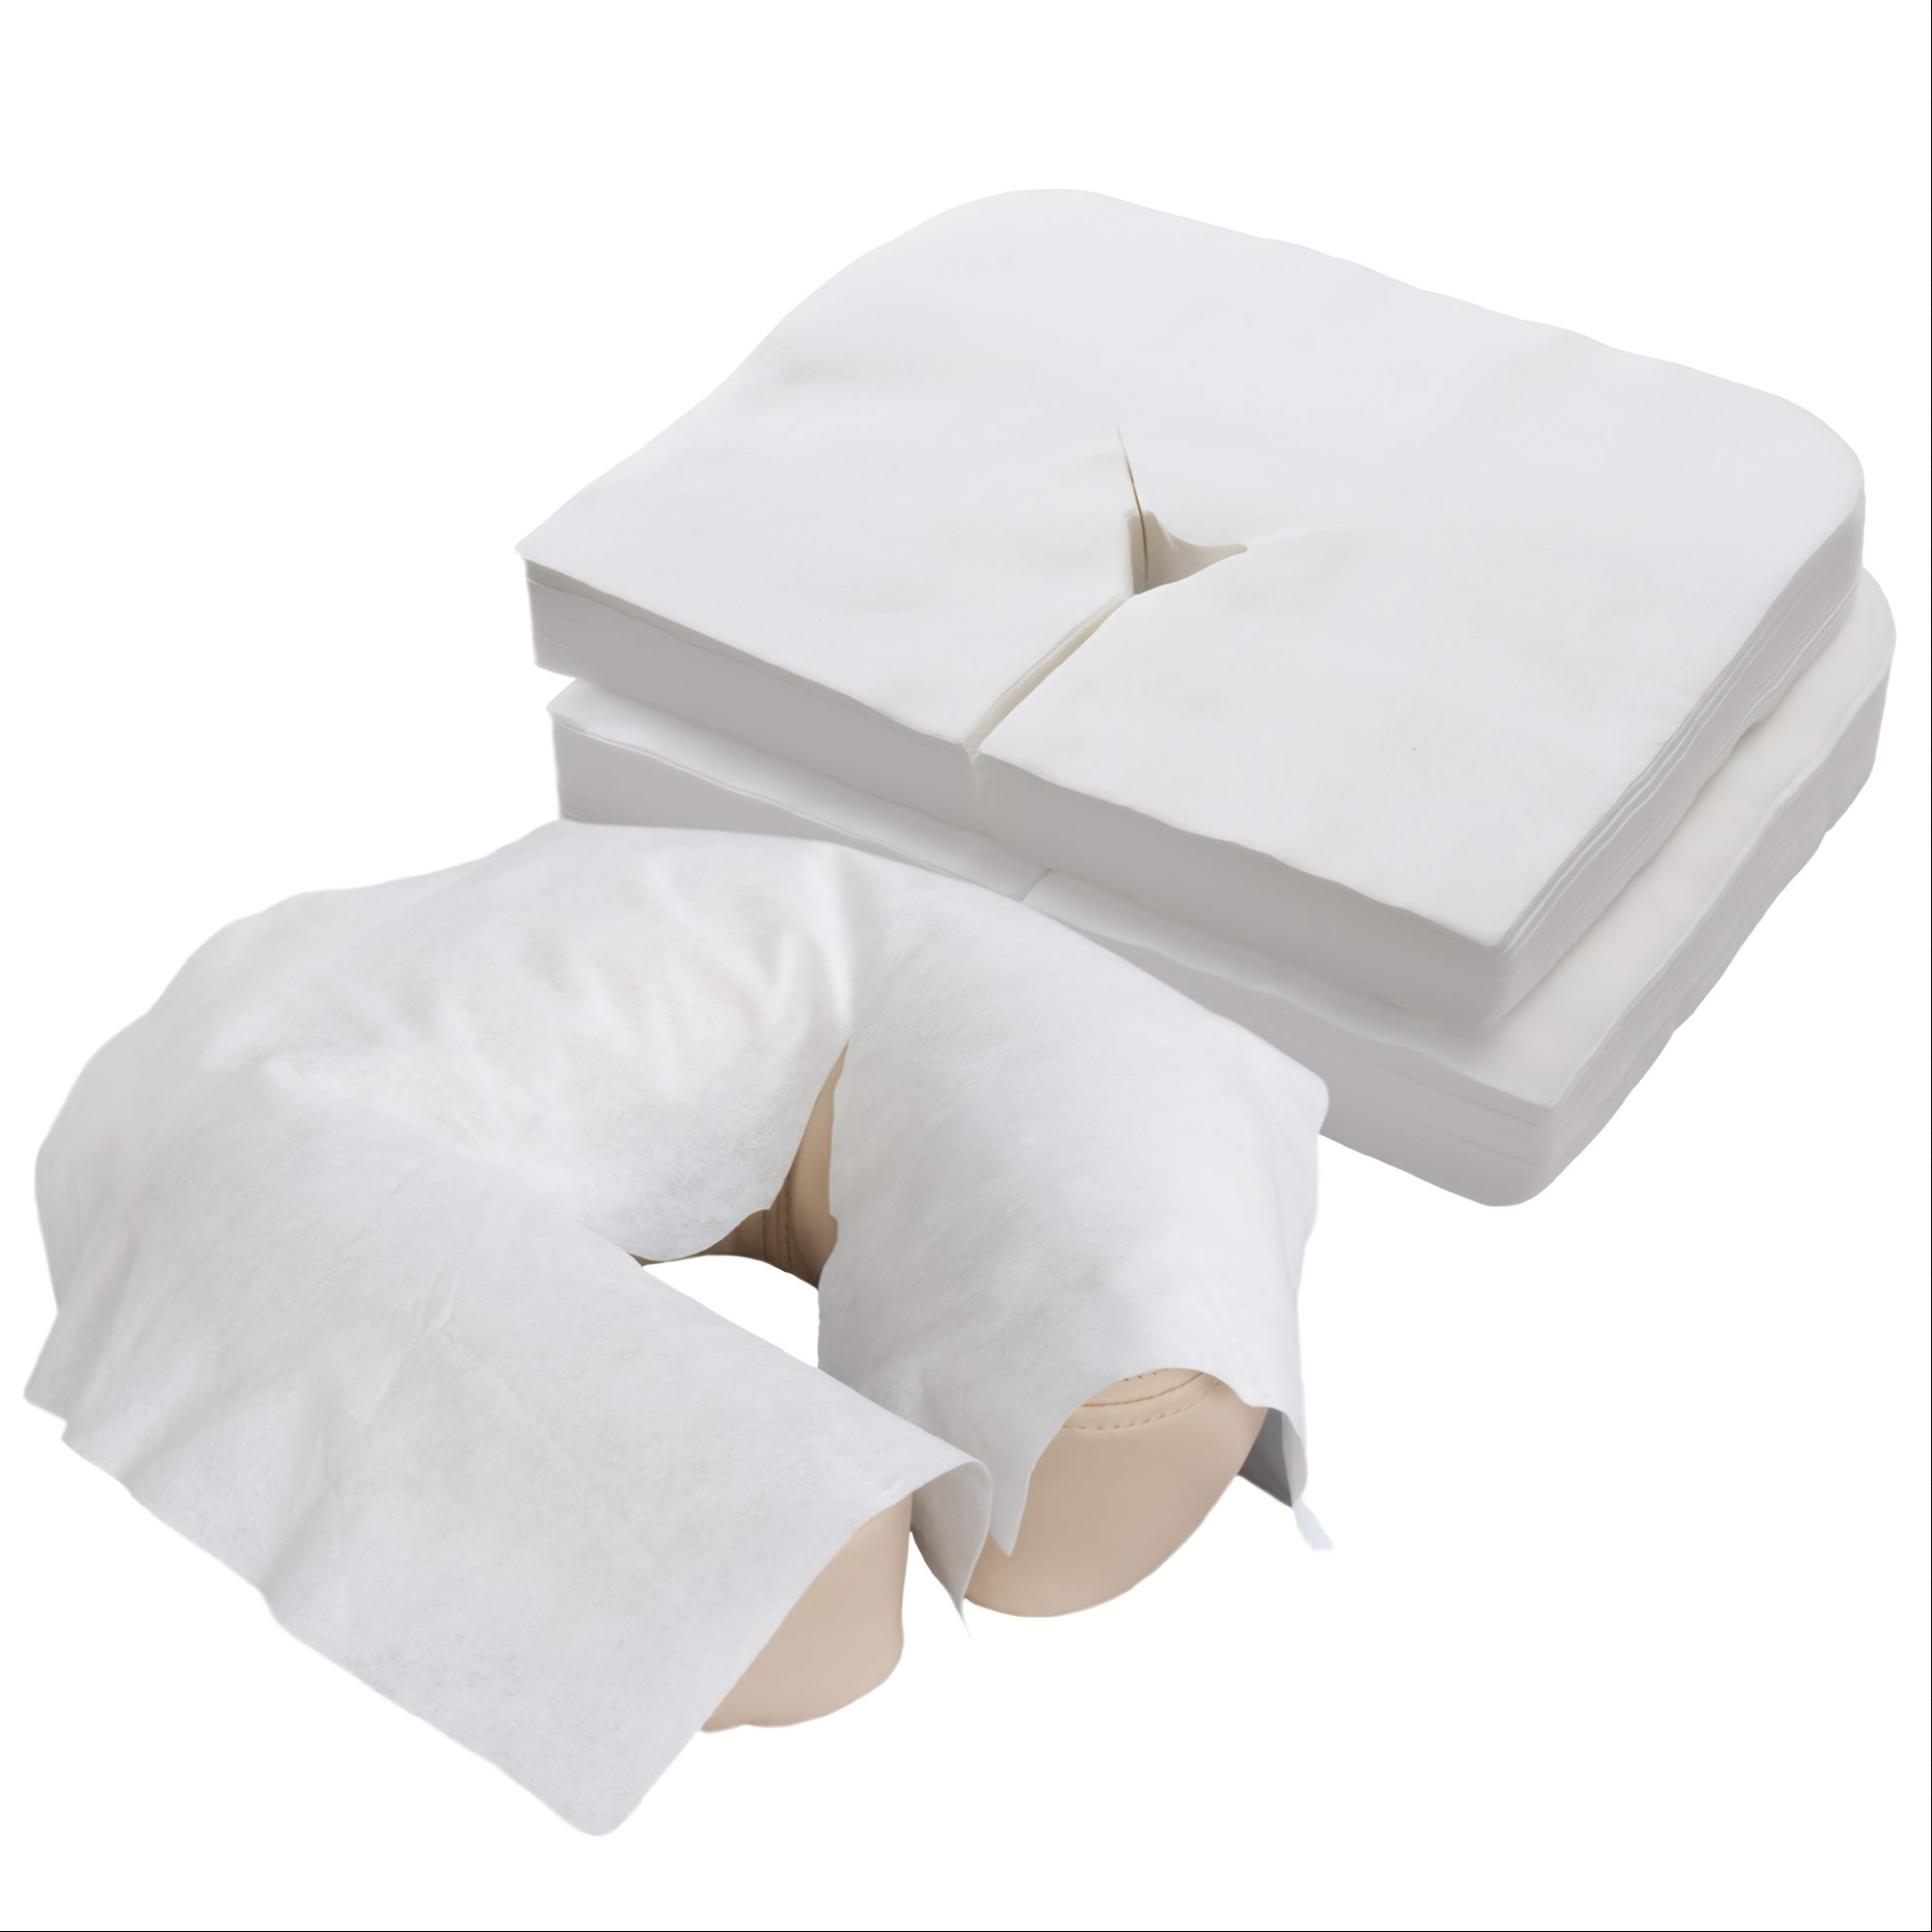 

100pcs Disposable Face Cradle Covers, Ultra Soft, Non-sticking Massage Face Covers/headrest Covers For Massage Tables & Massage Chairs